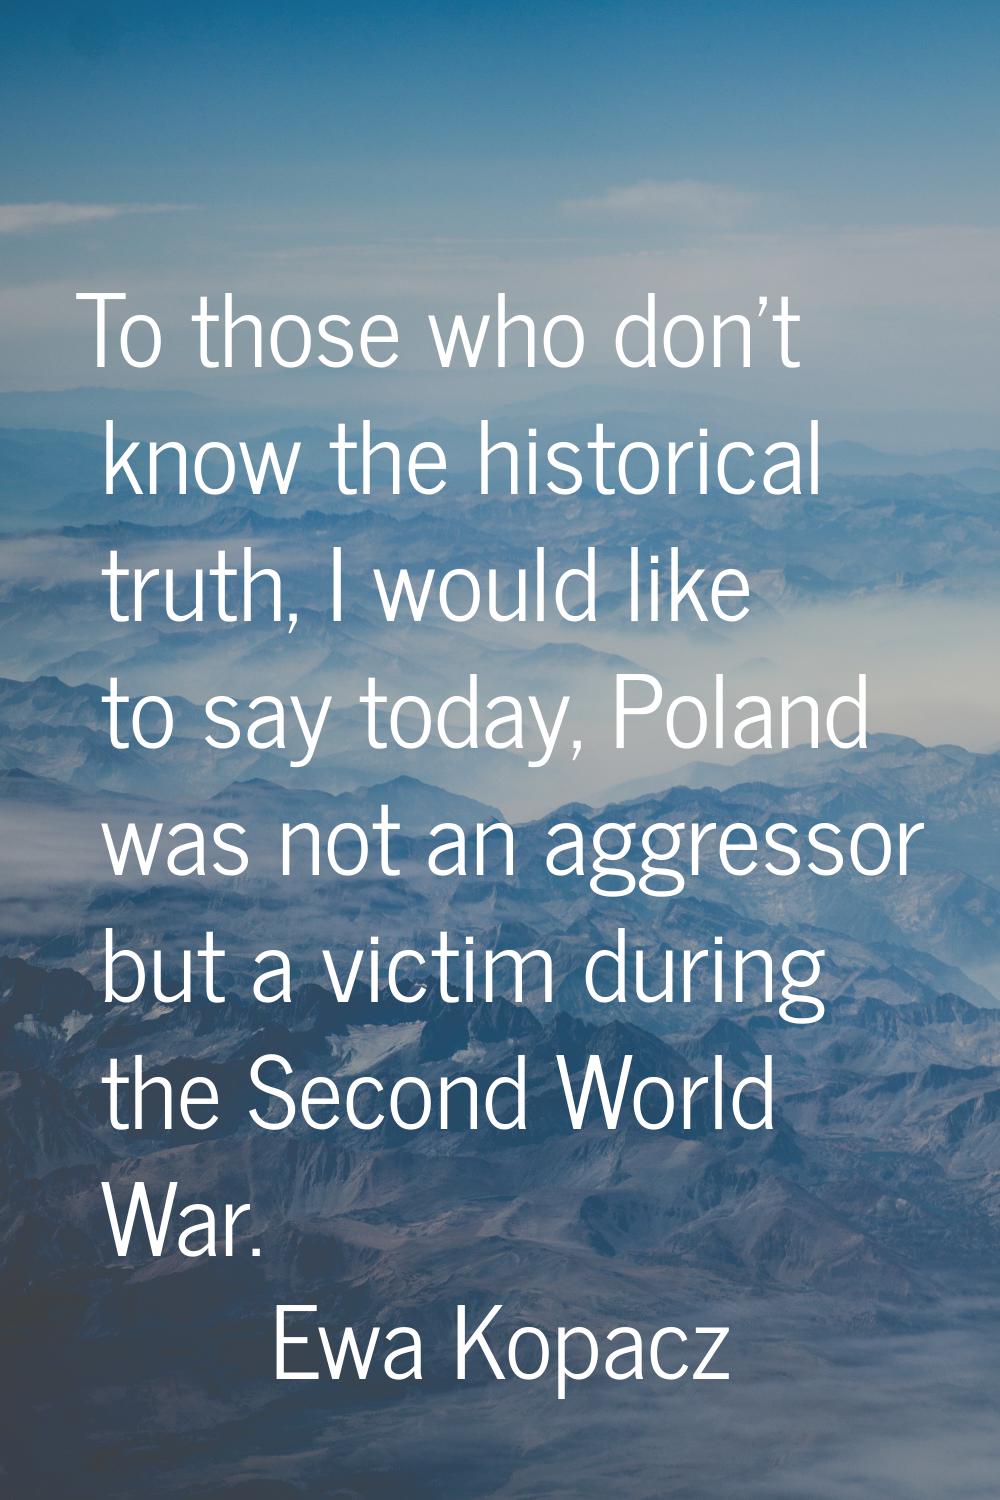 To those who don't know the historical truth, I would like to say today, Poland was not an aggresso